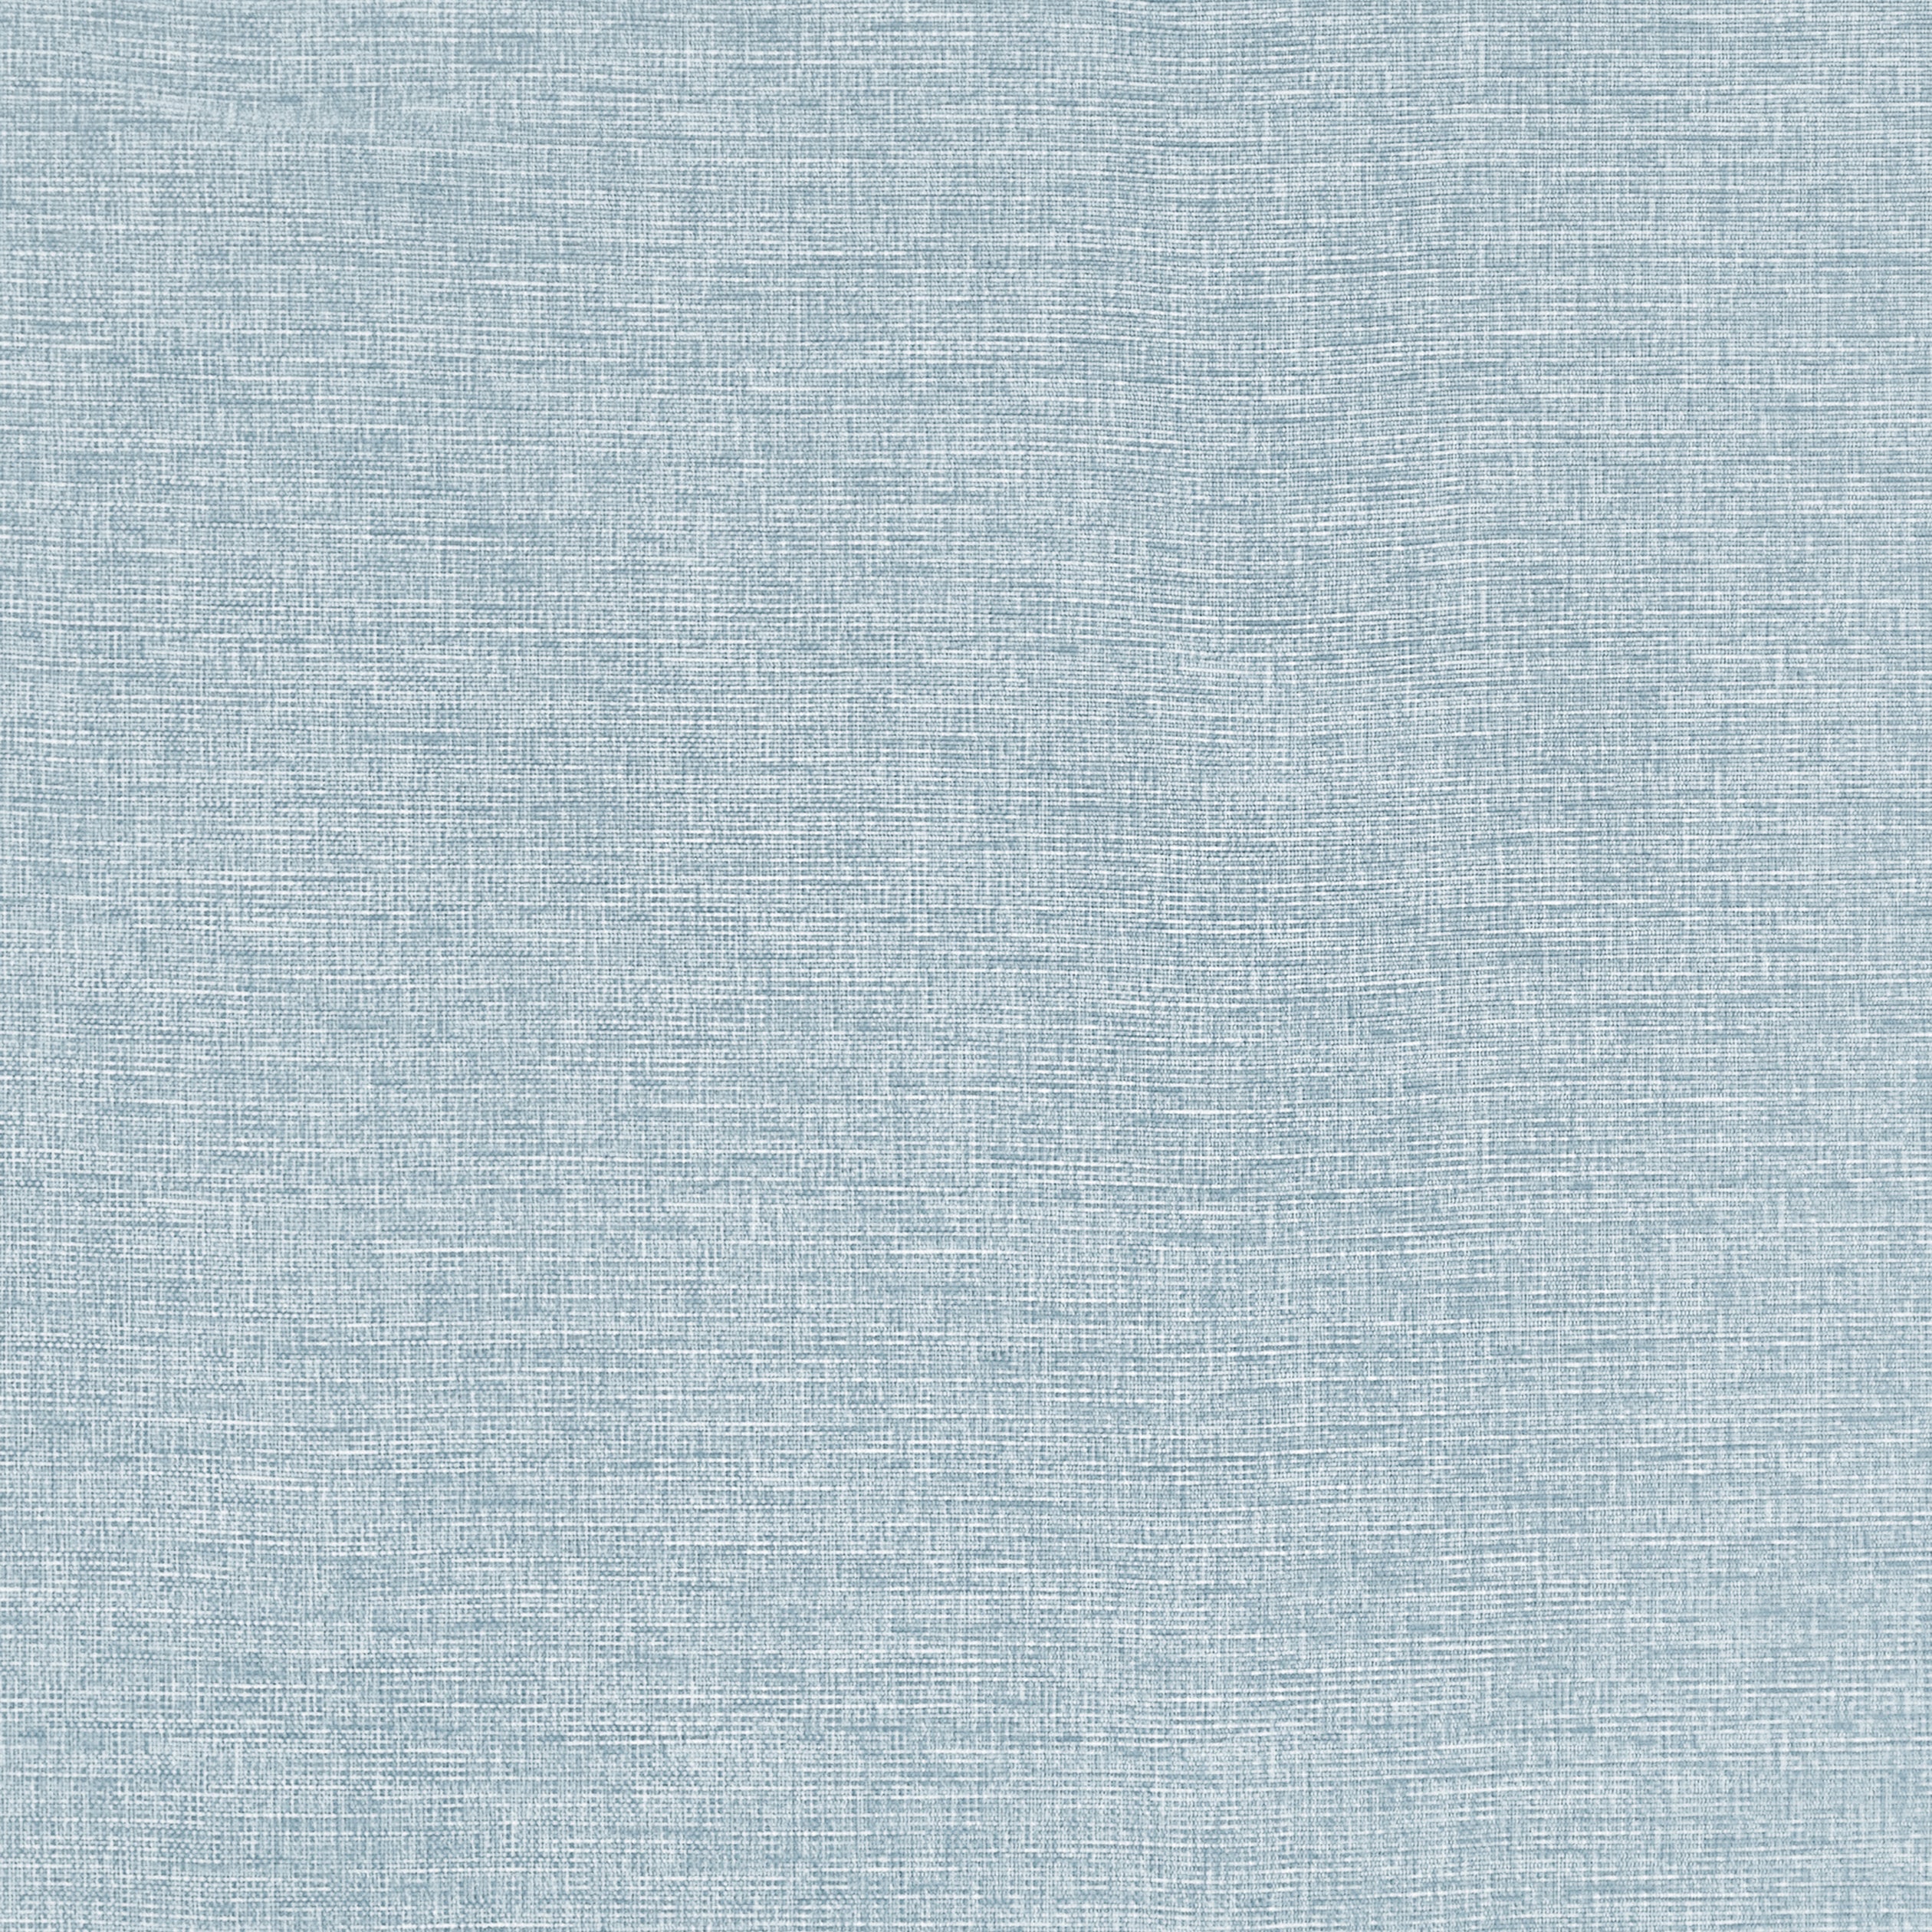 Finley fabric in chambray color - pattern number W81605 - by Thibaut in the Locale collection